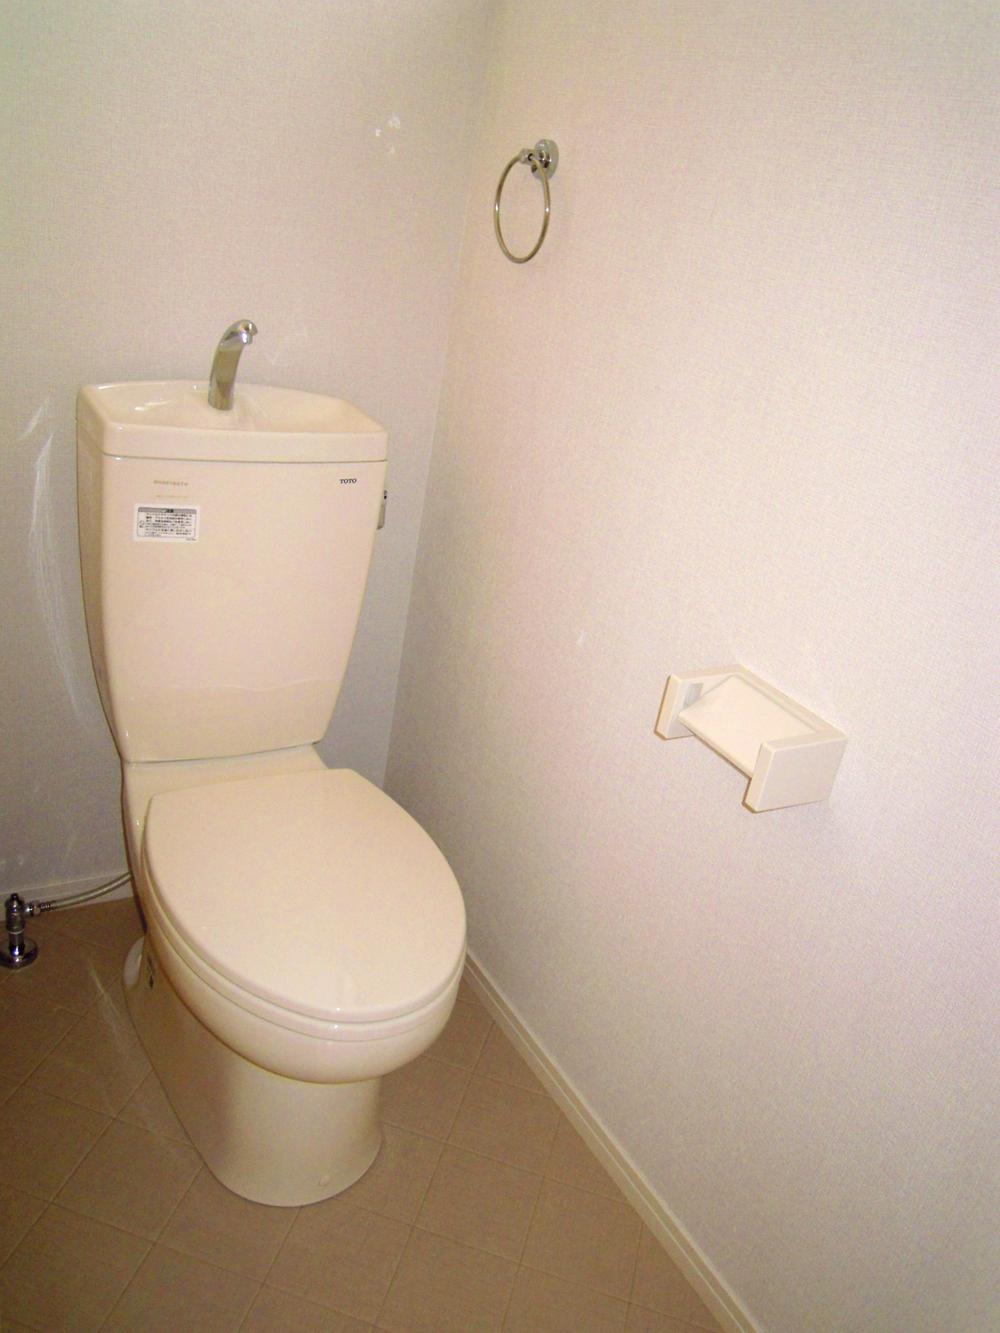 Toilet. Same specifications is a picture.